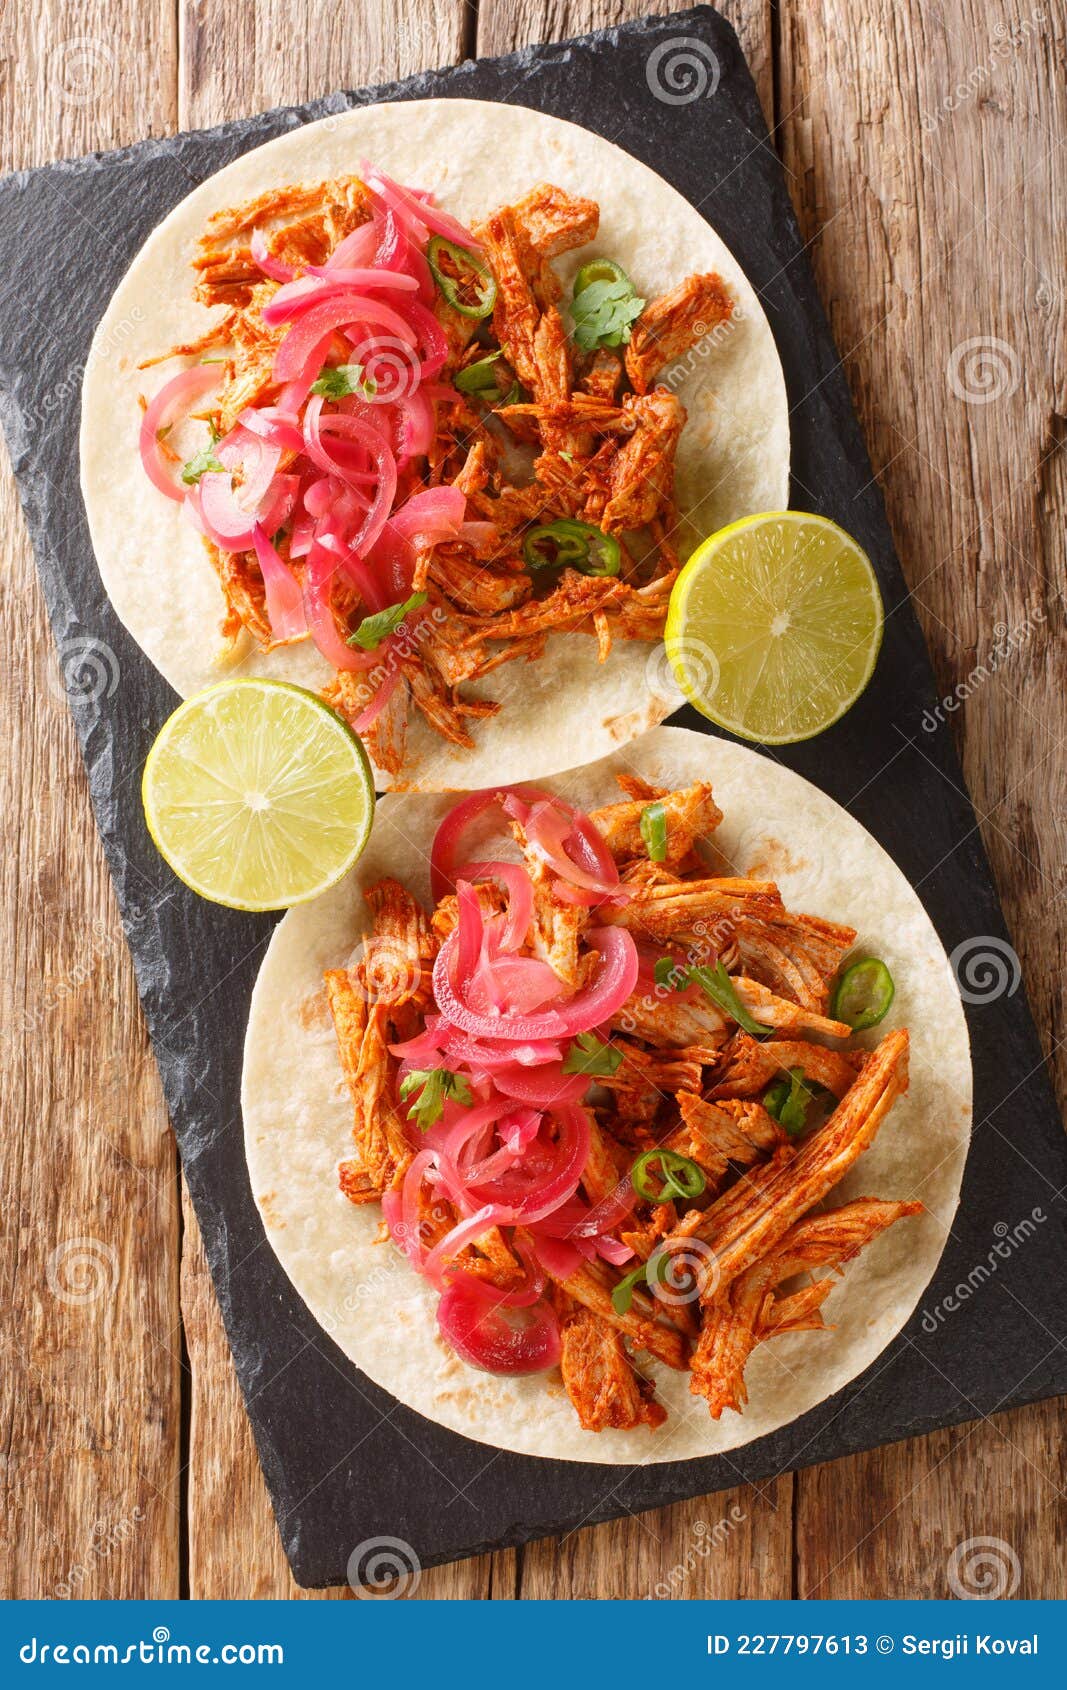 cochinita pibil also puerco pibil or cochinita con achiote is a traditional mexican slow-roasted pork dish from the yucatan